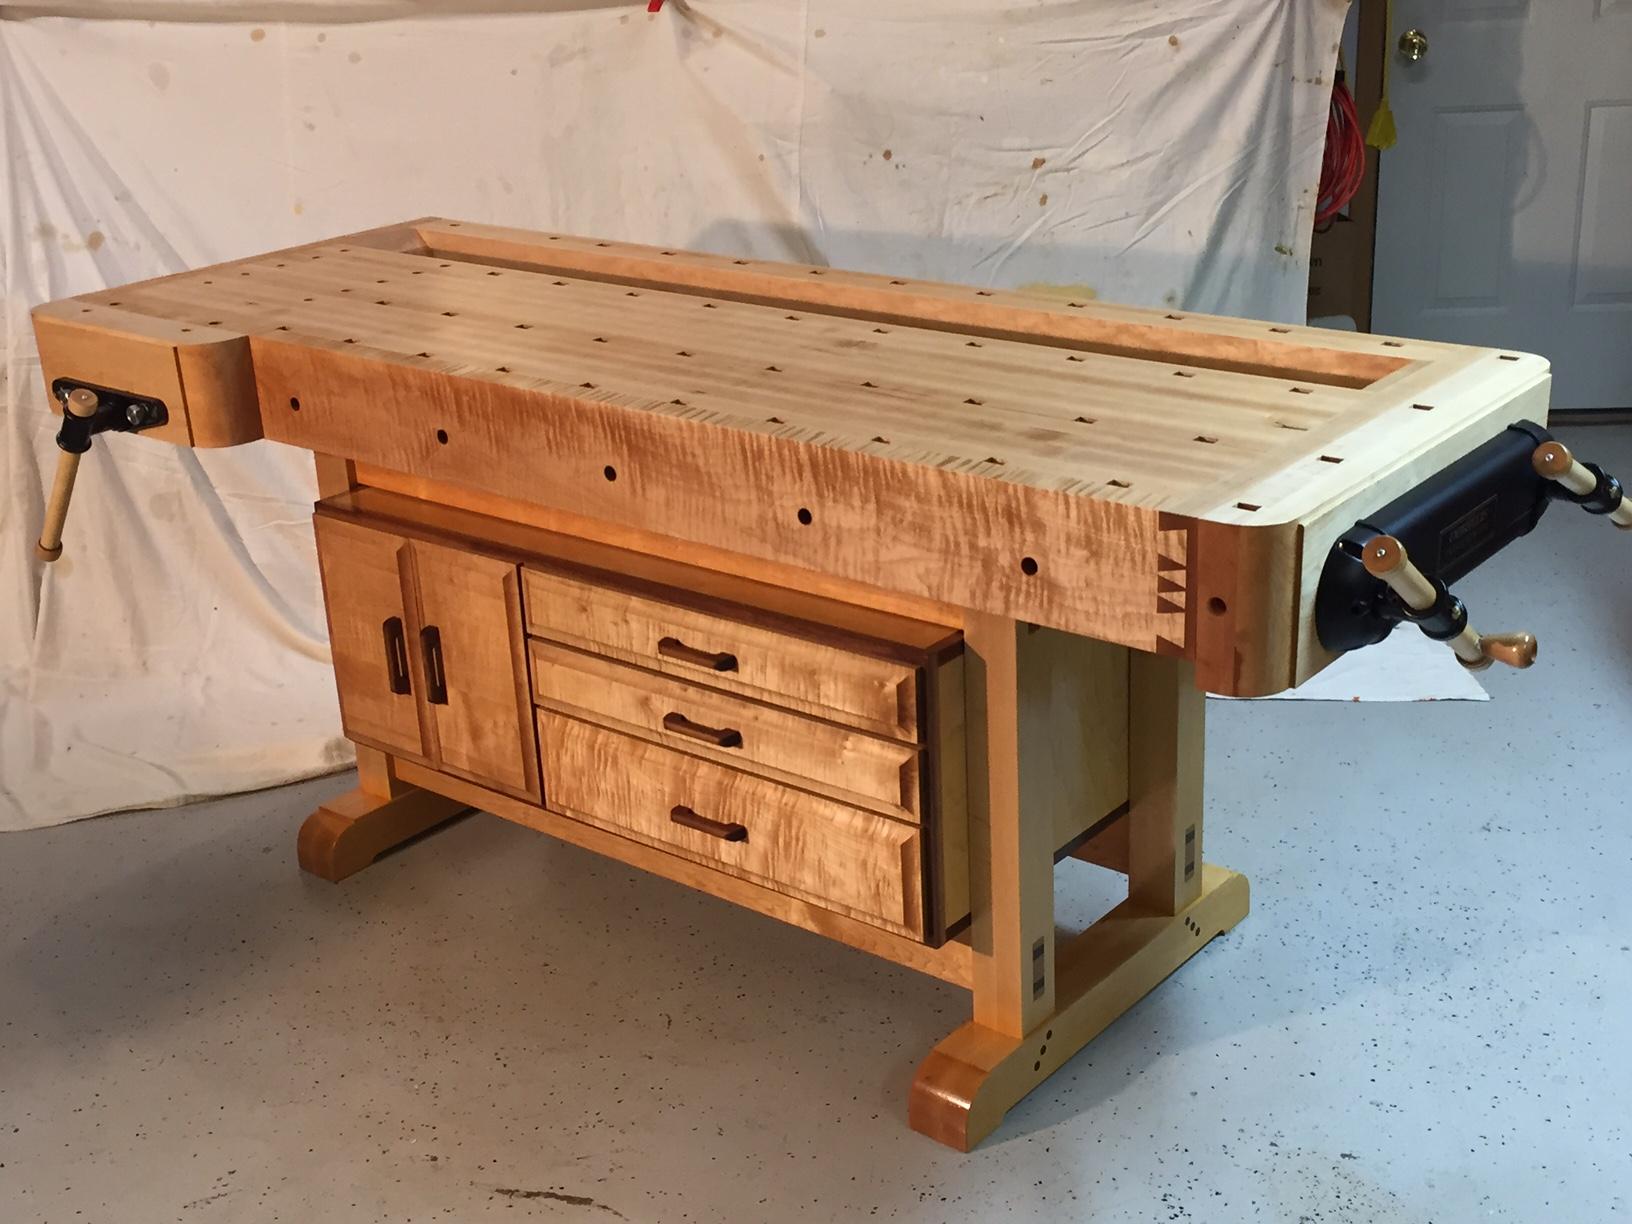 Woodworking Bench Introduction - Contentment Turnings by Dave